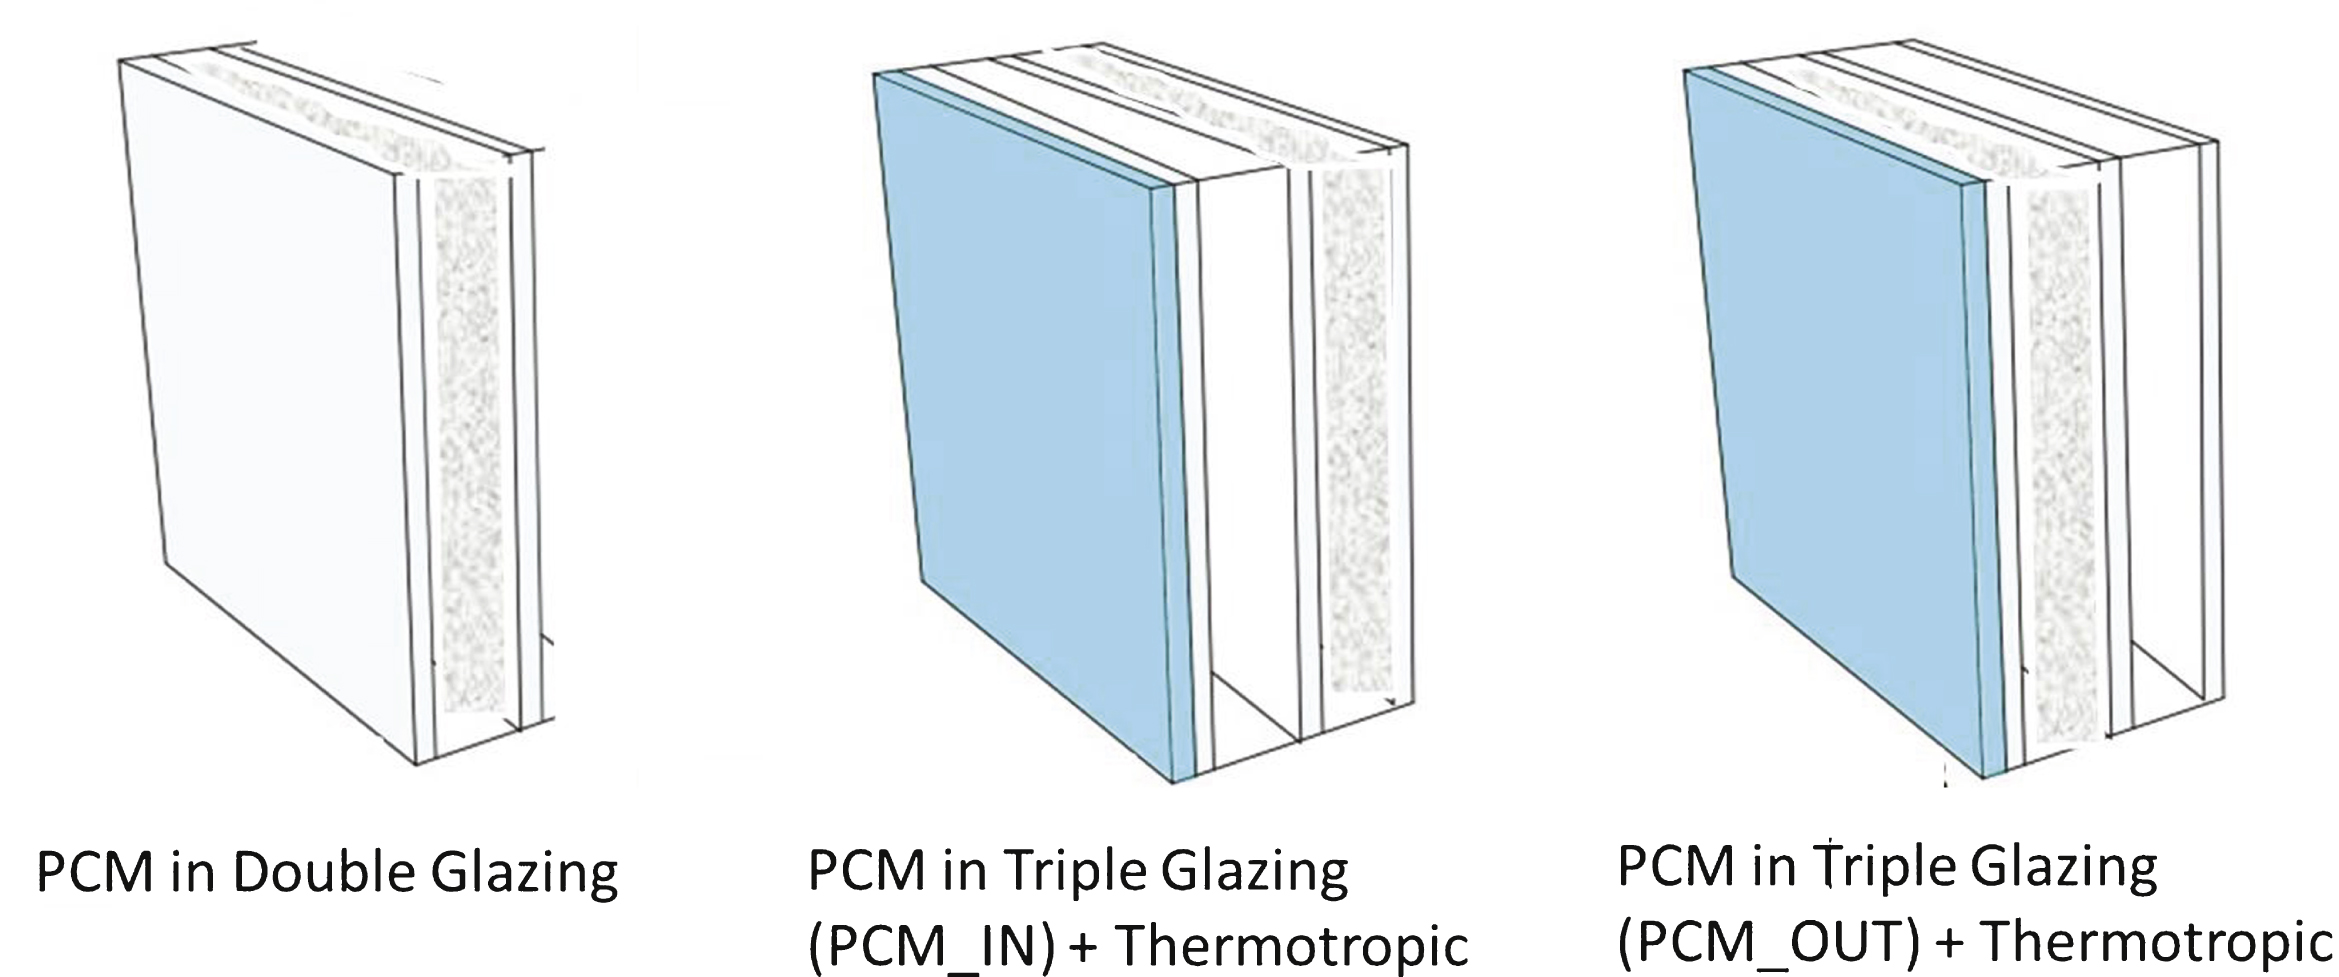 Glazing filled with PCMs: double-glazing configuration and triple-glazing configurations (PCM_IN and PCM_OUT) coupled with a Thermotropic.